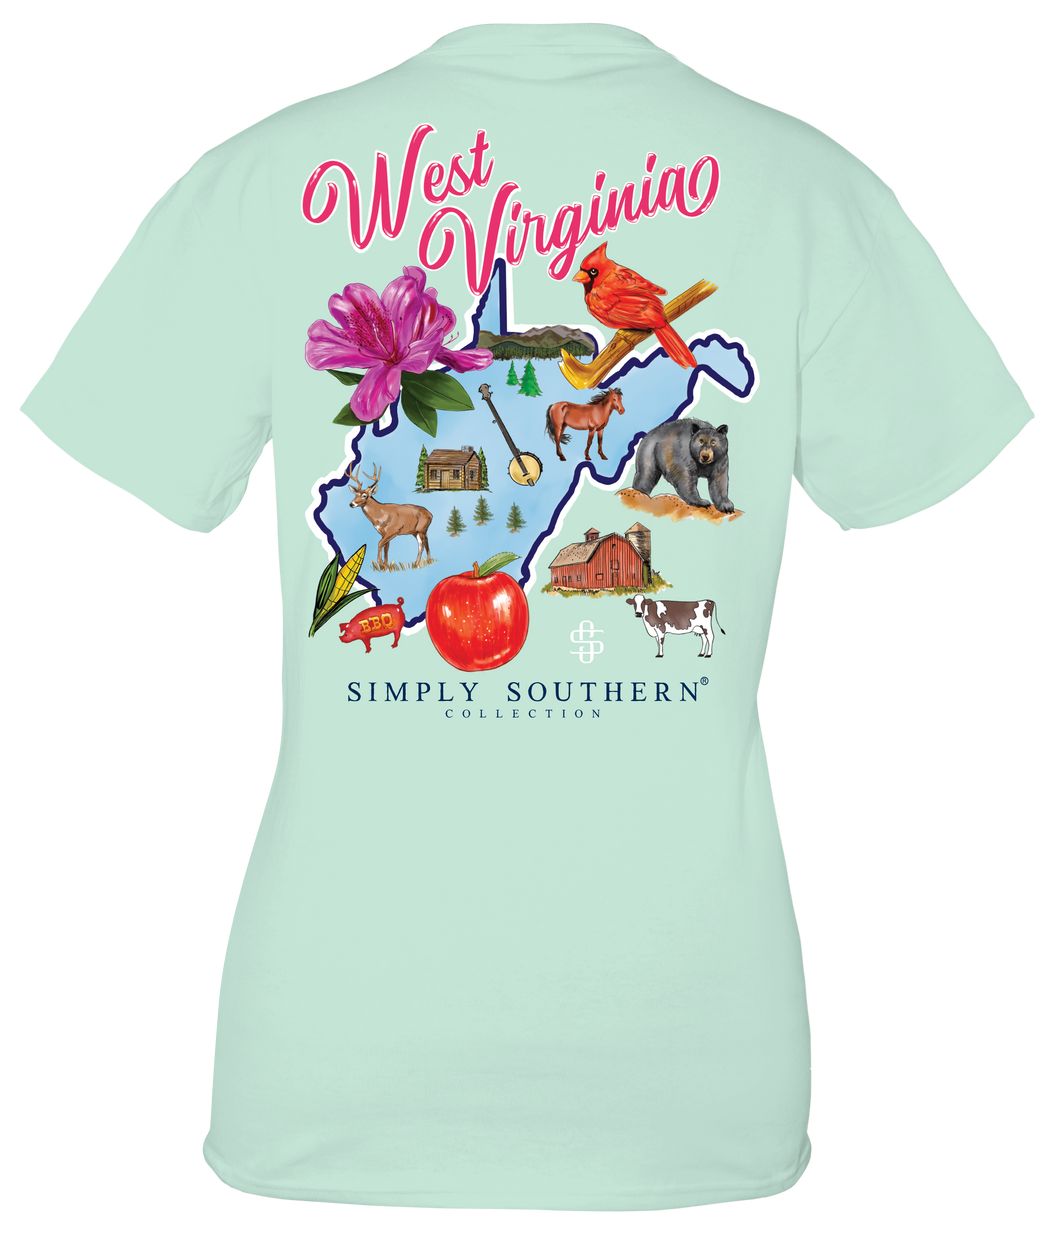 Simply Southern STATES-WV WEST VIRGINIA Short Sleeve T-Shirt